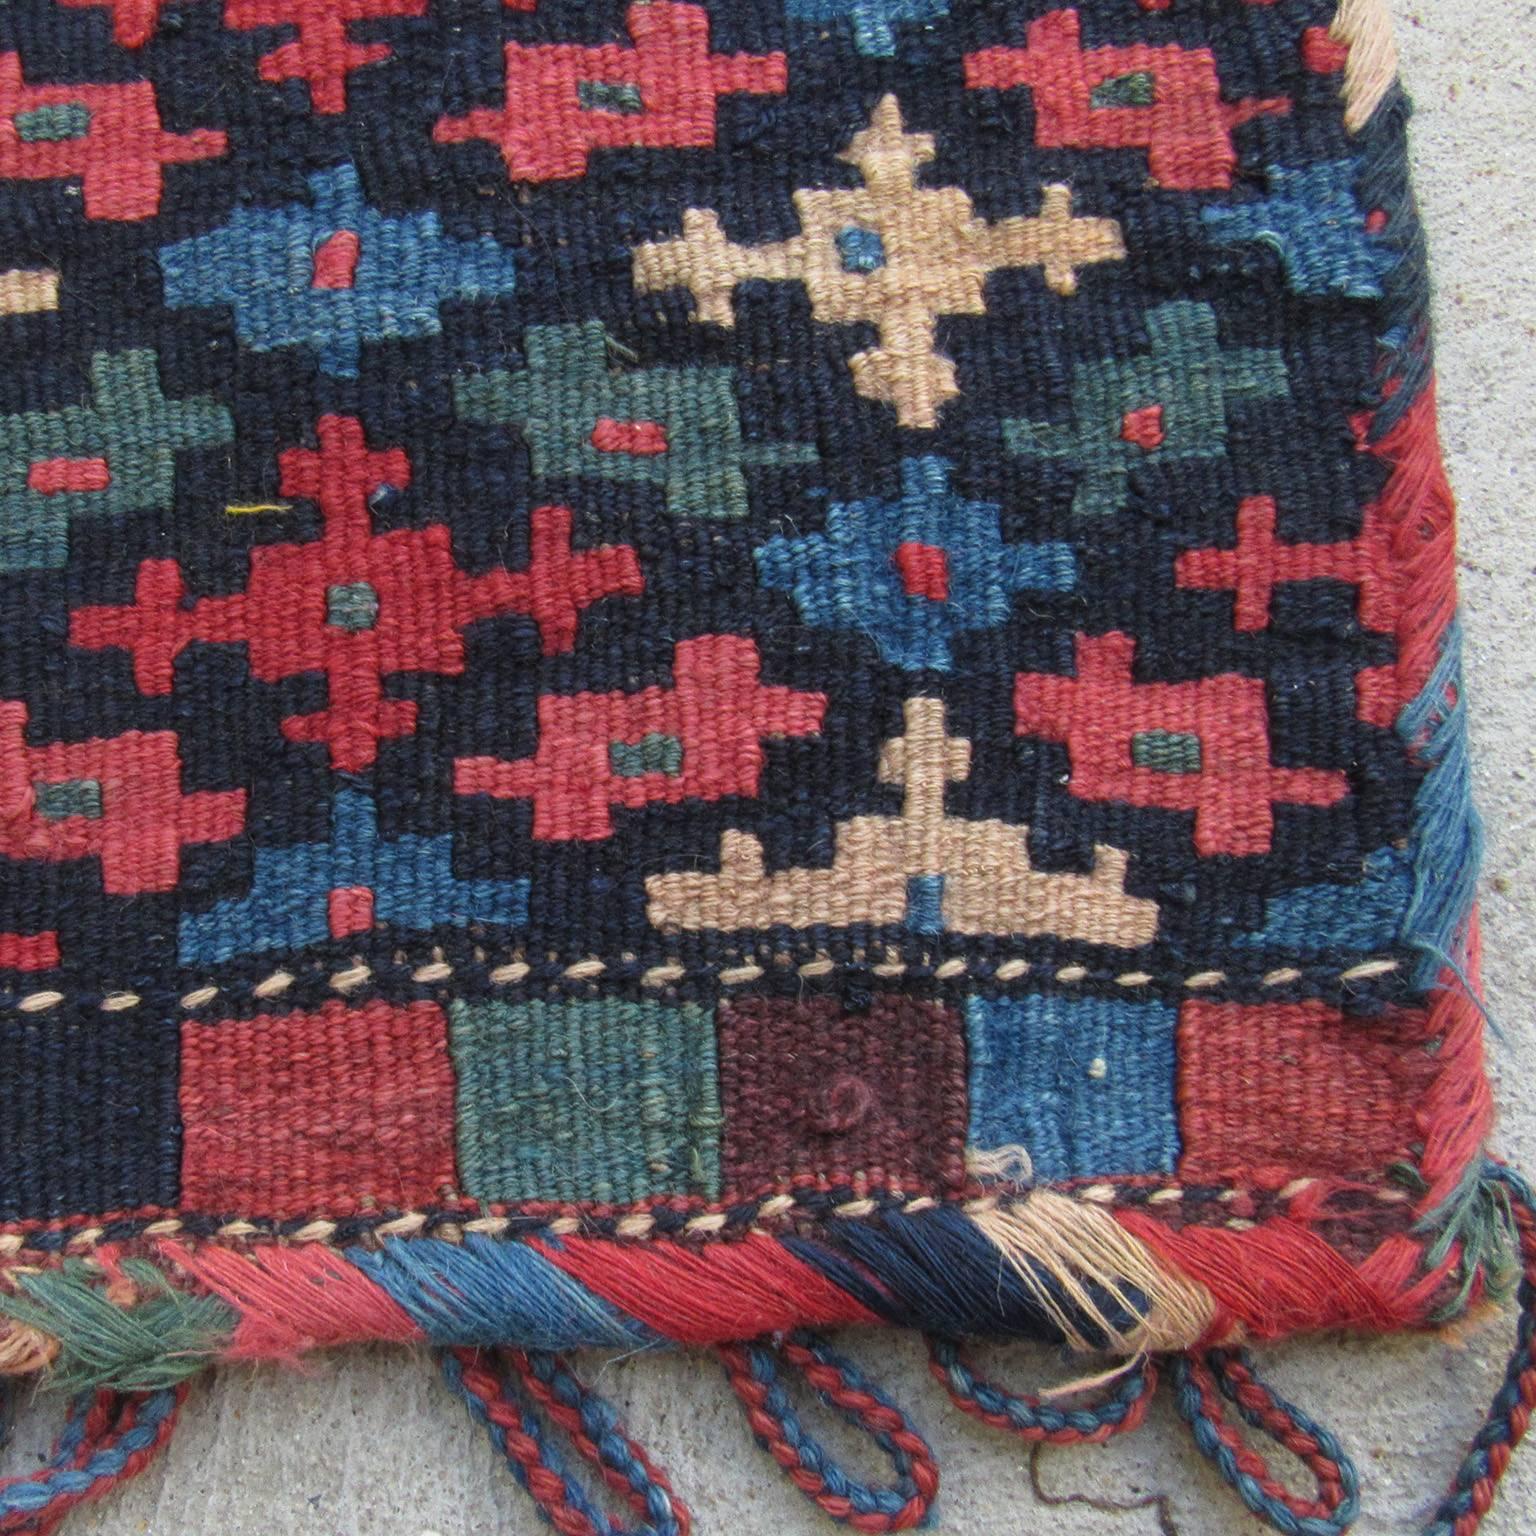 Late 19th century Kilim bagface. Great condition and color.
Measures: 20 x 21 inches.